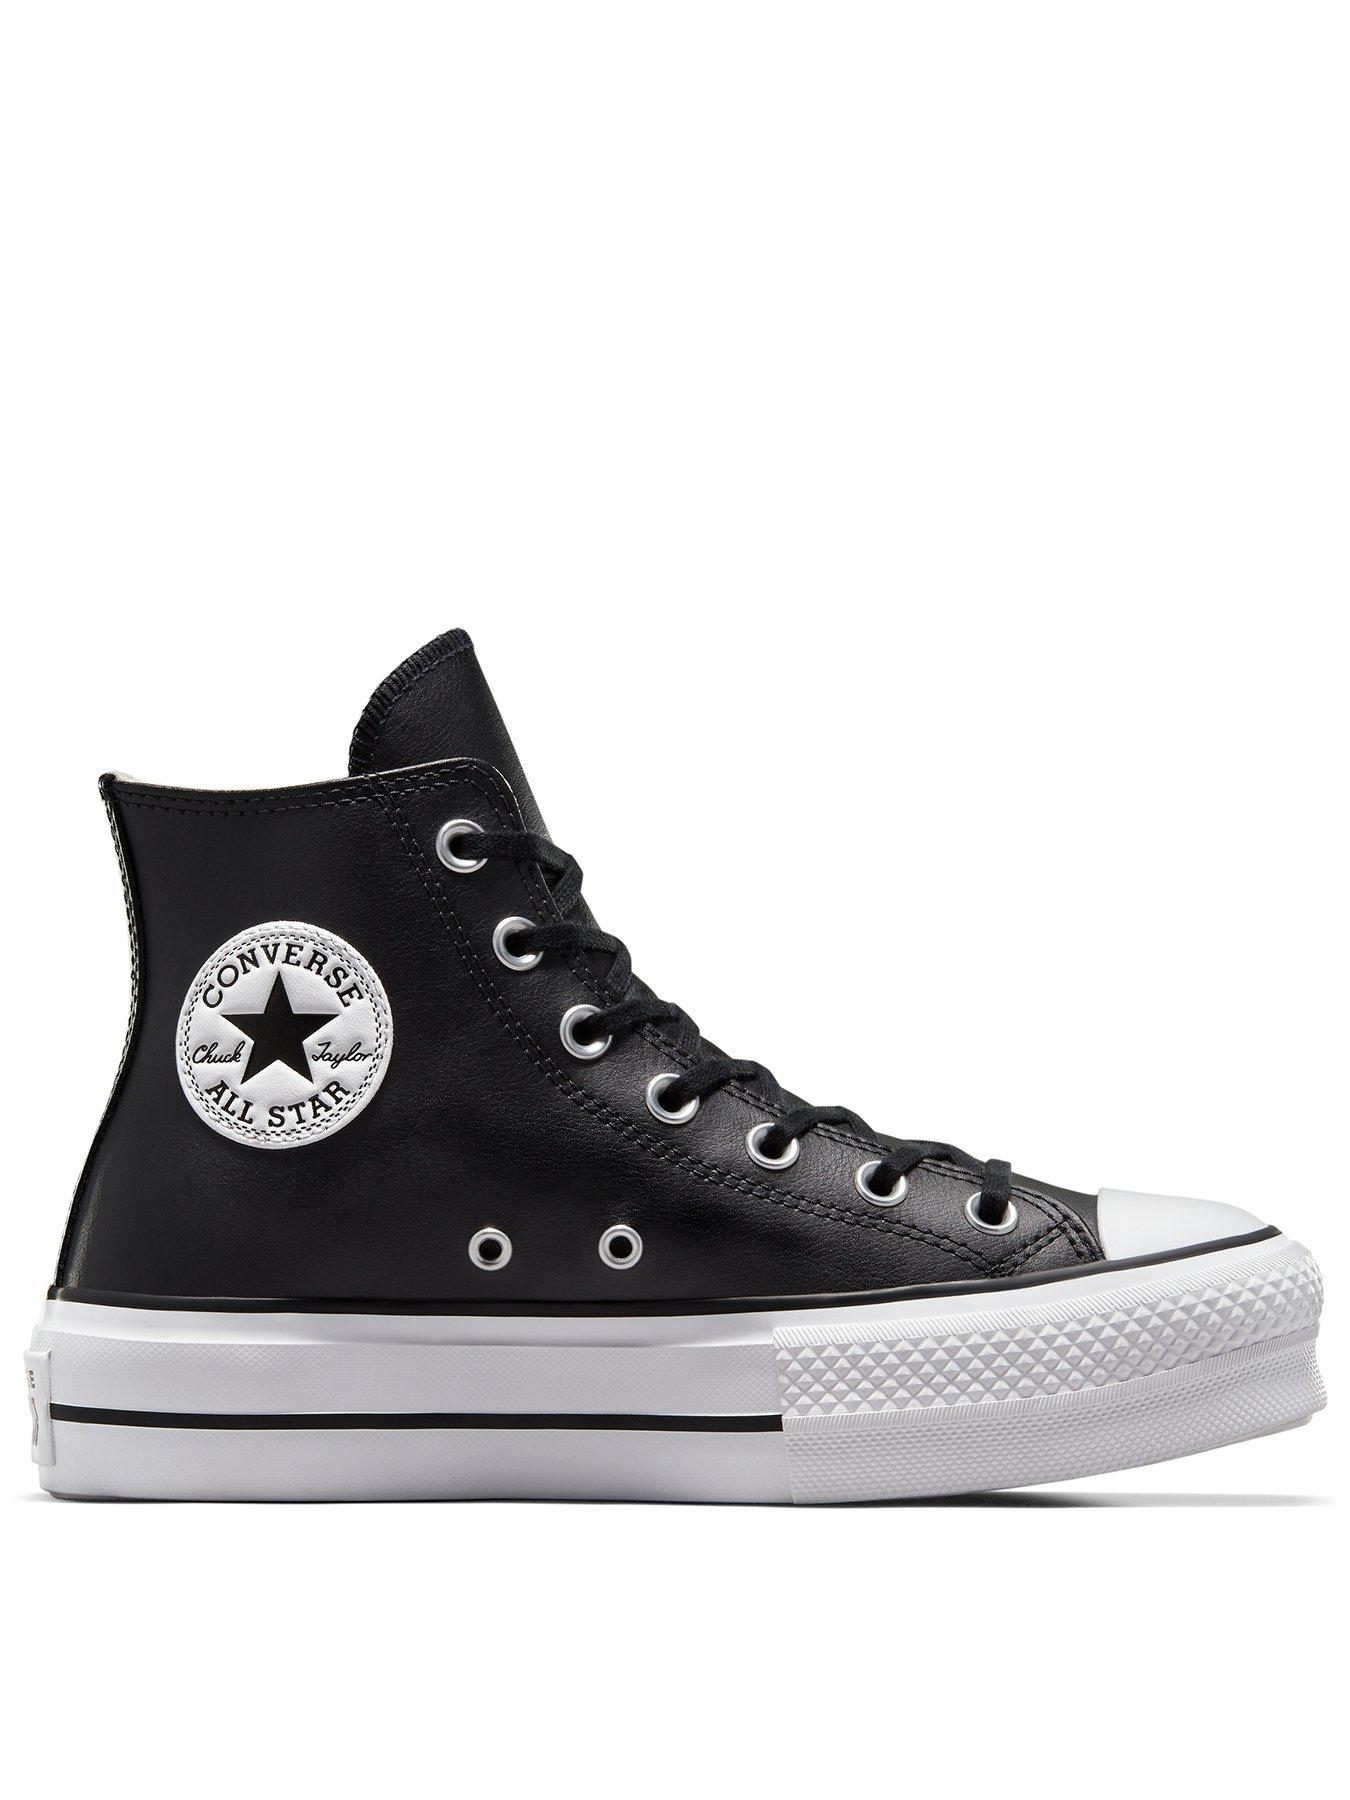 womens leather converse high tops